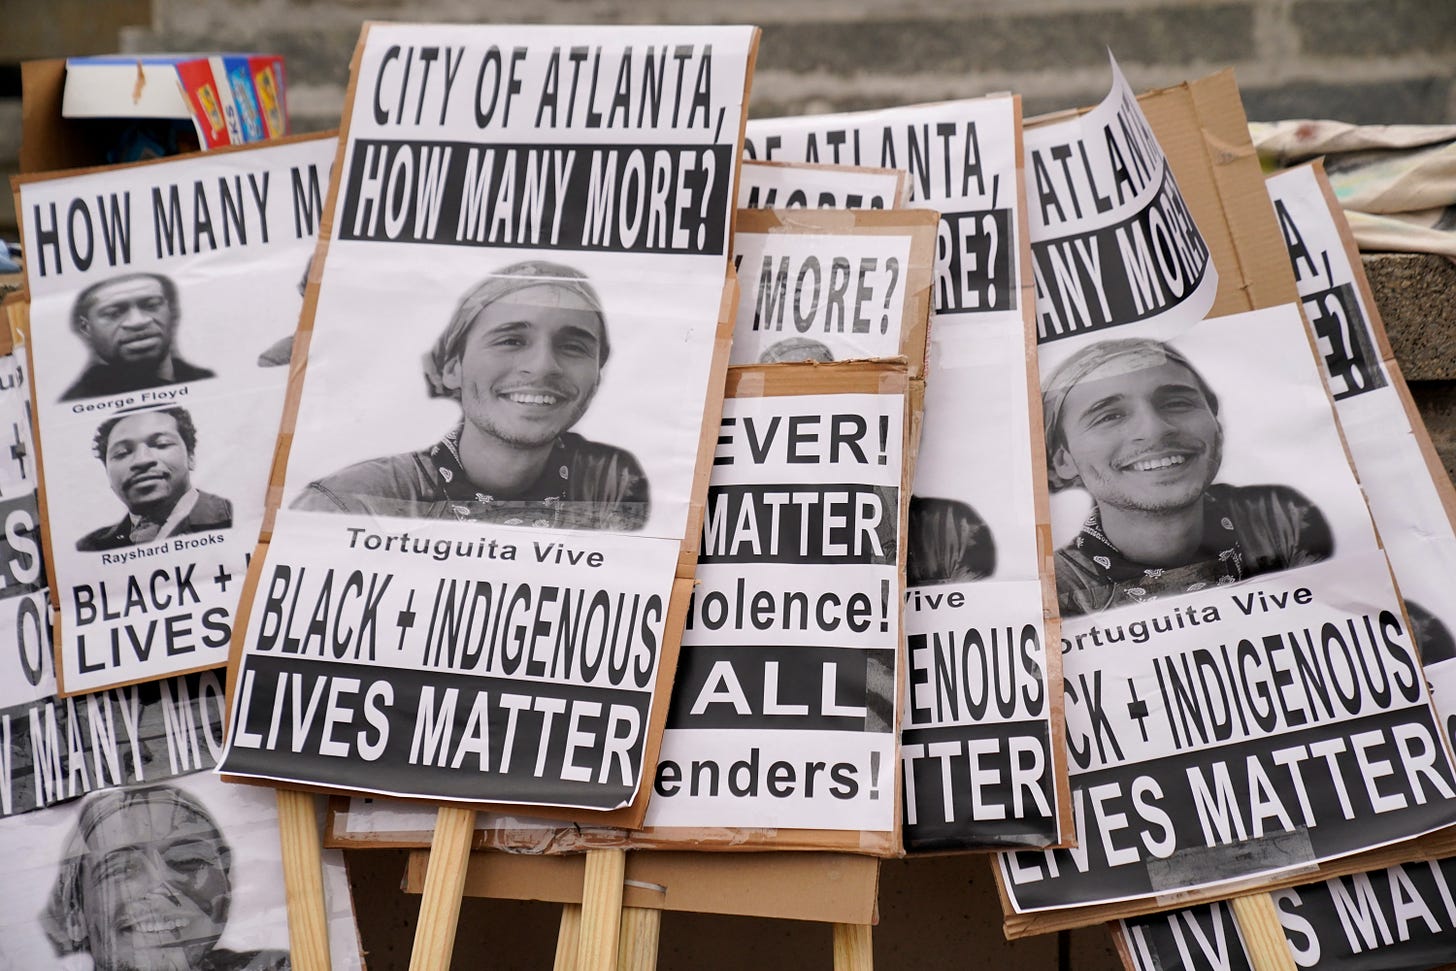 People gather for protests following death of protester in Atlanta